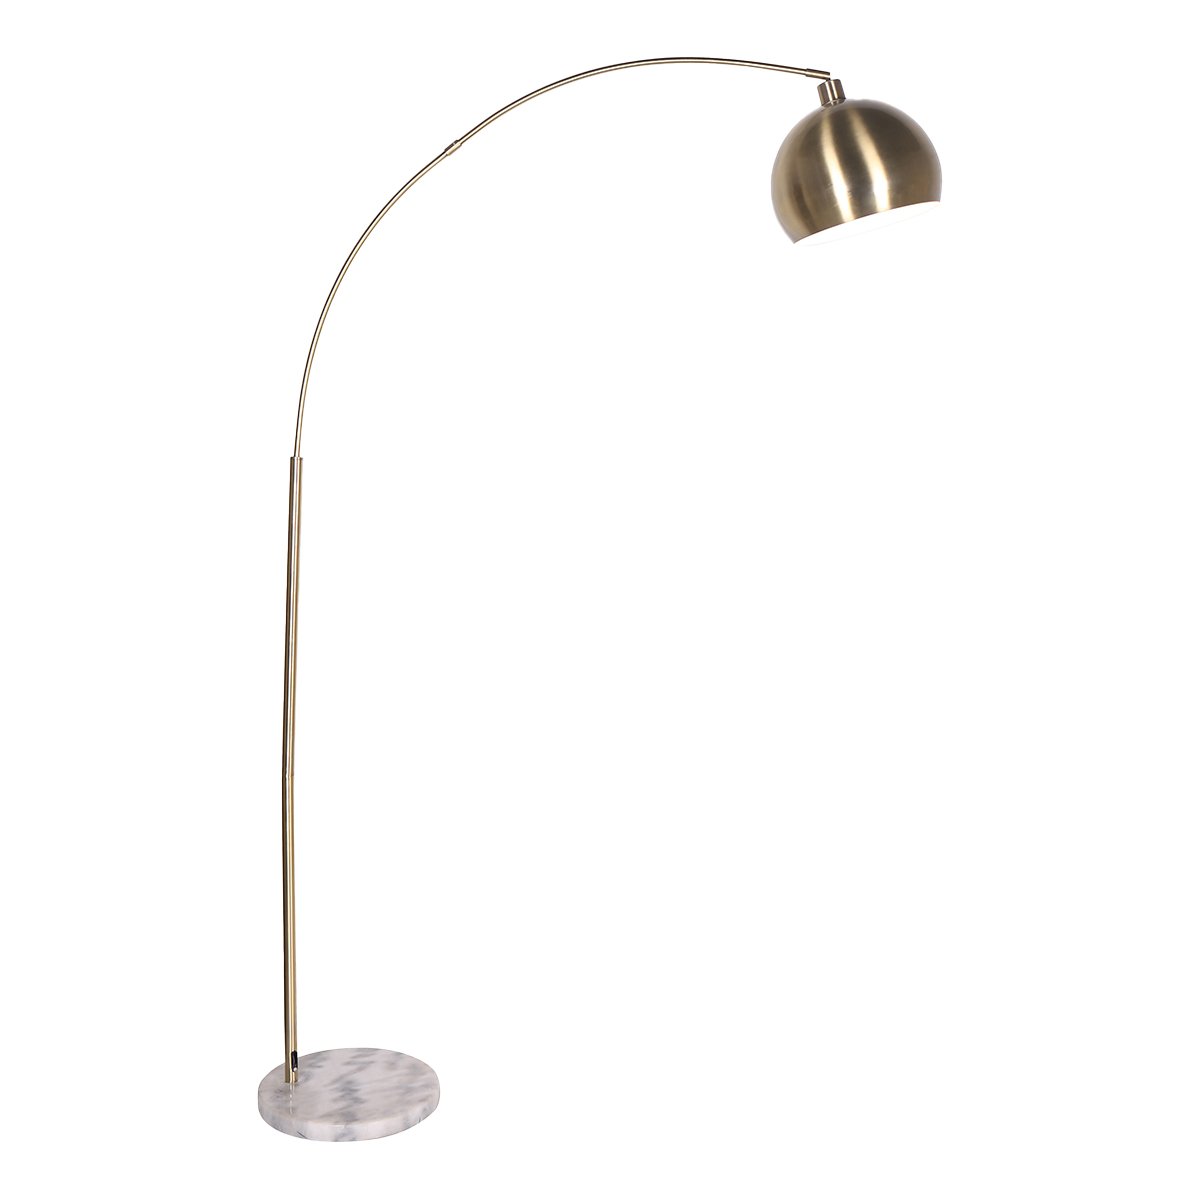 Sarantino Arc Floor Lamp Antique Brass Finish with Marble Base 2